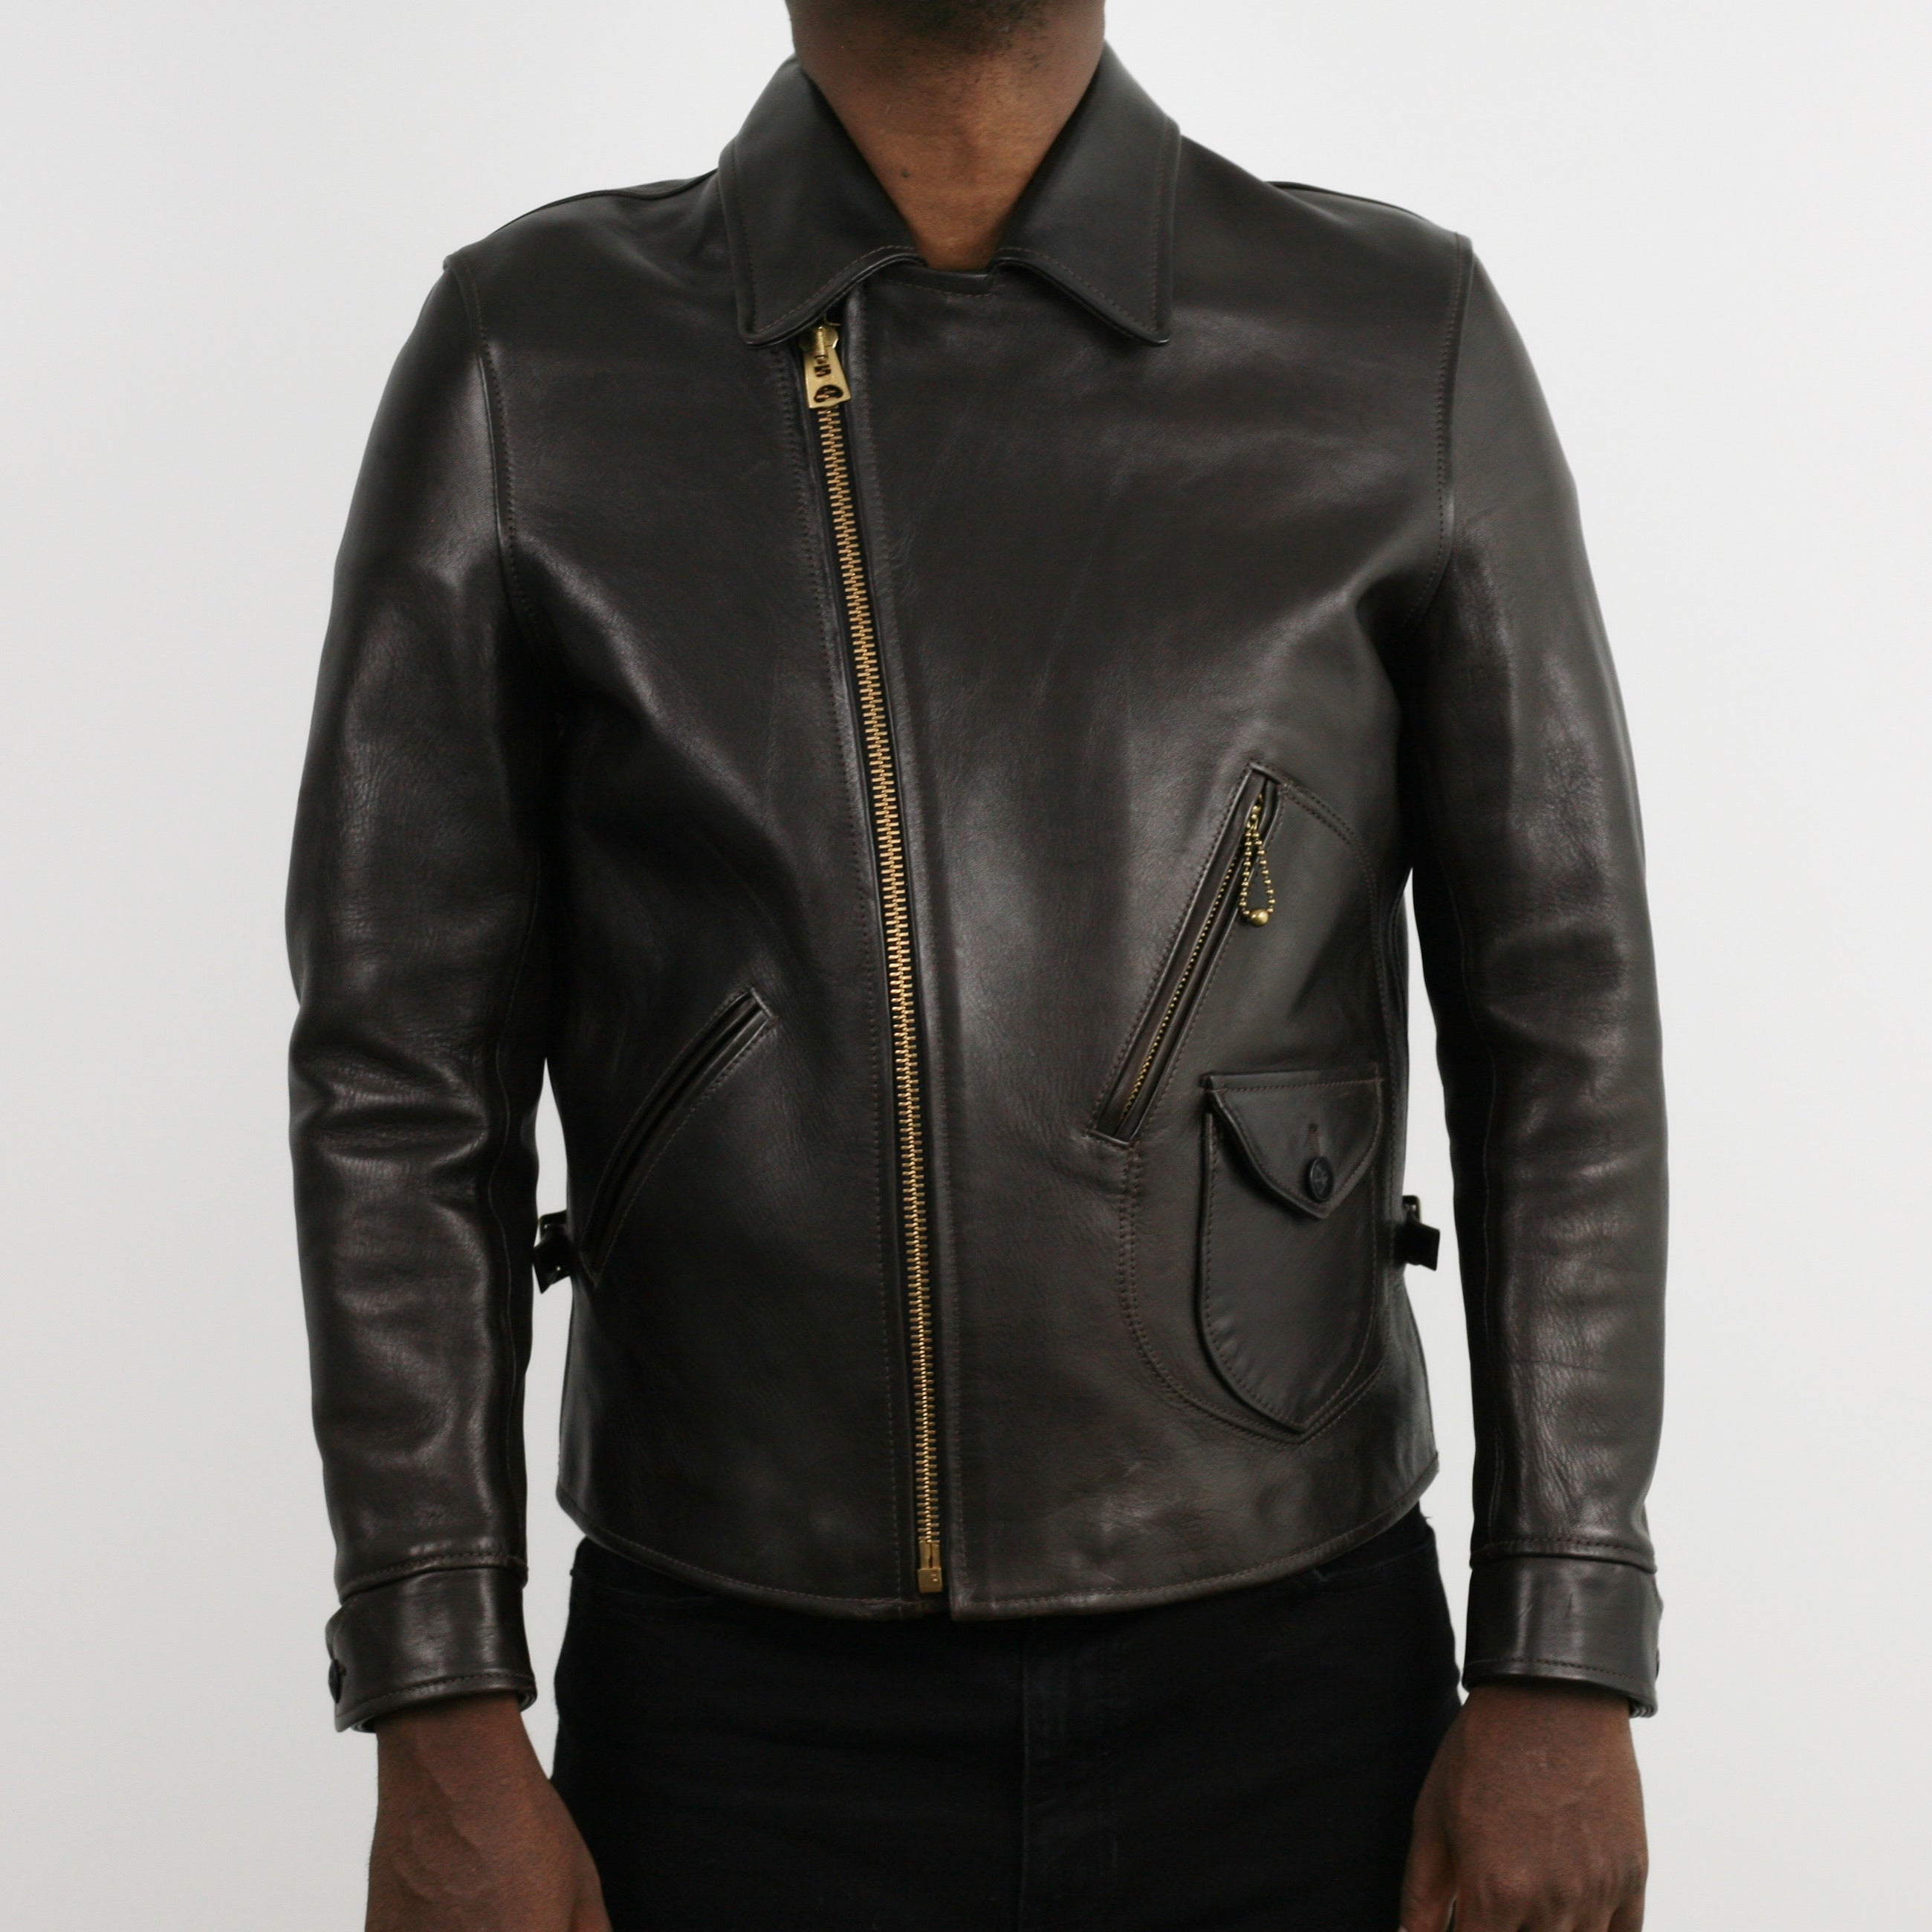 Y'2 LEATHER Hand Dyed Horse Double Riders Jacket in Brown at TEMPO